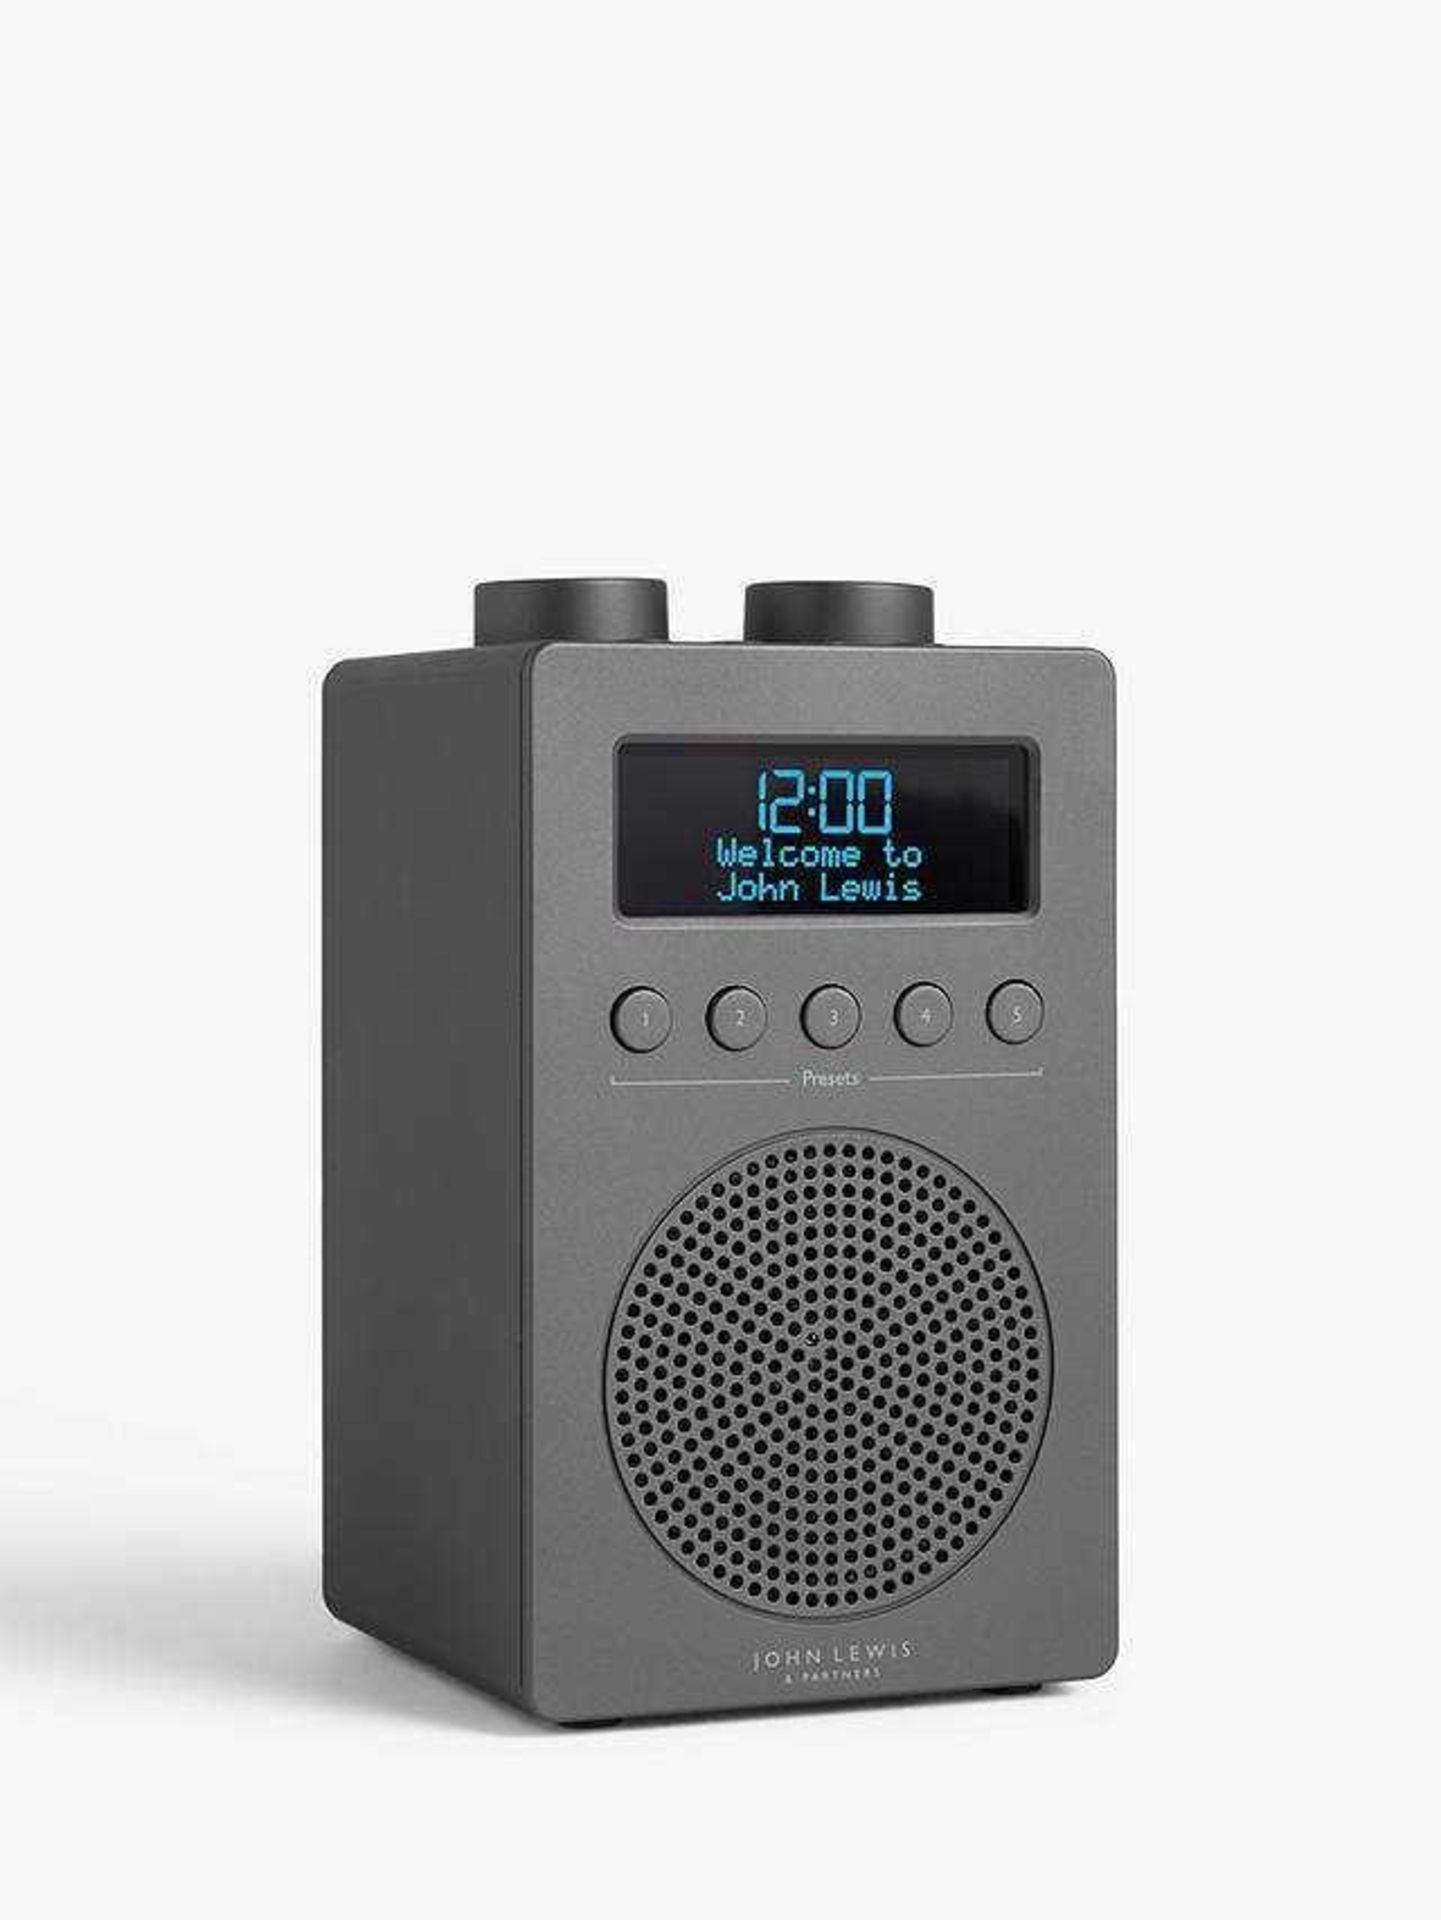 Rrp £40 Each Boxed John Lewis Spectrum Solo Dab And Fm Digital Radios - Image 3 of 7